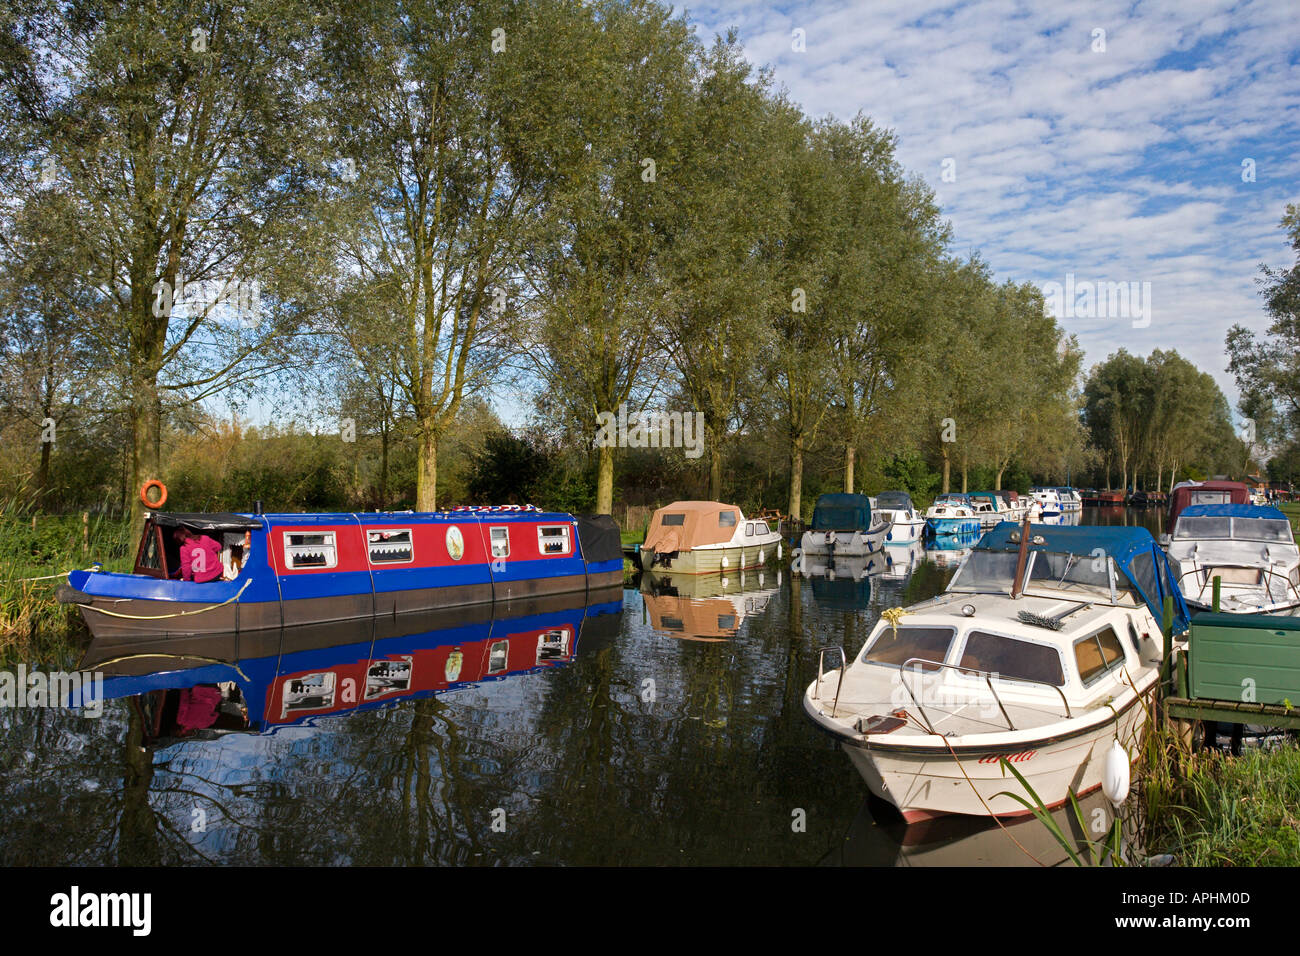 Paper MIll Lock on the river Chelmer at little Baddow, Near Chelmsford Essex. Stock Photo